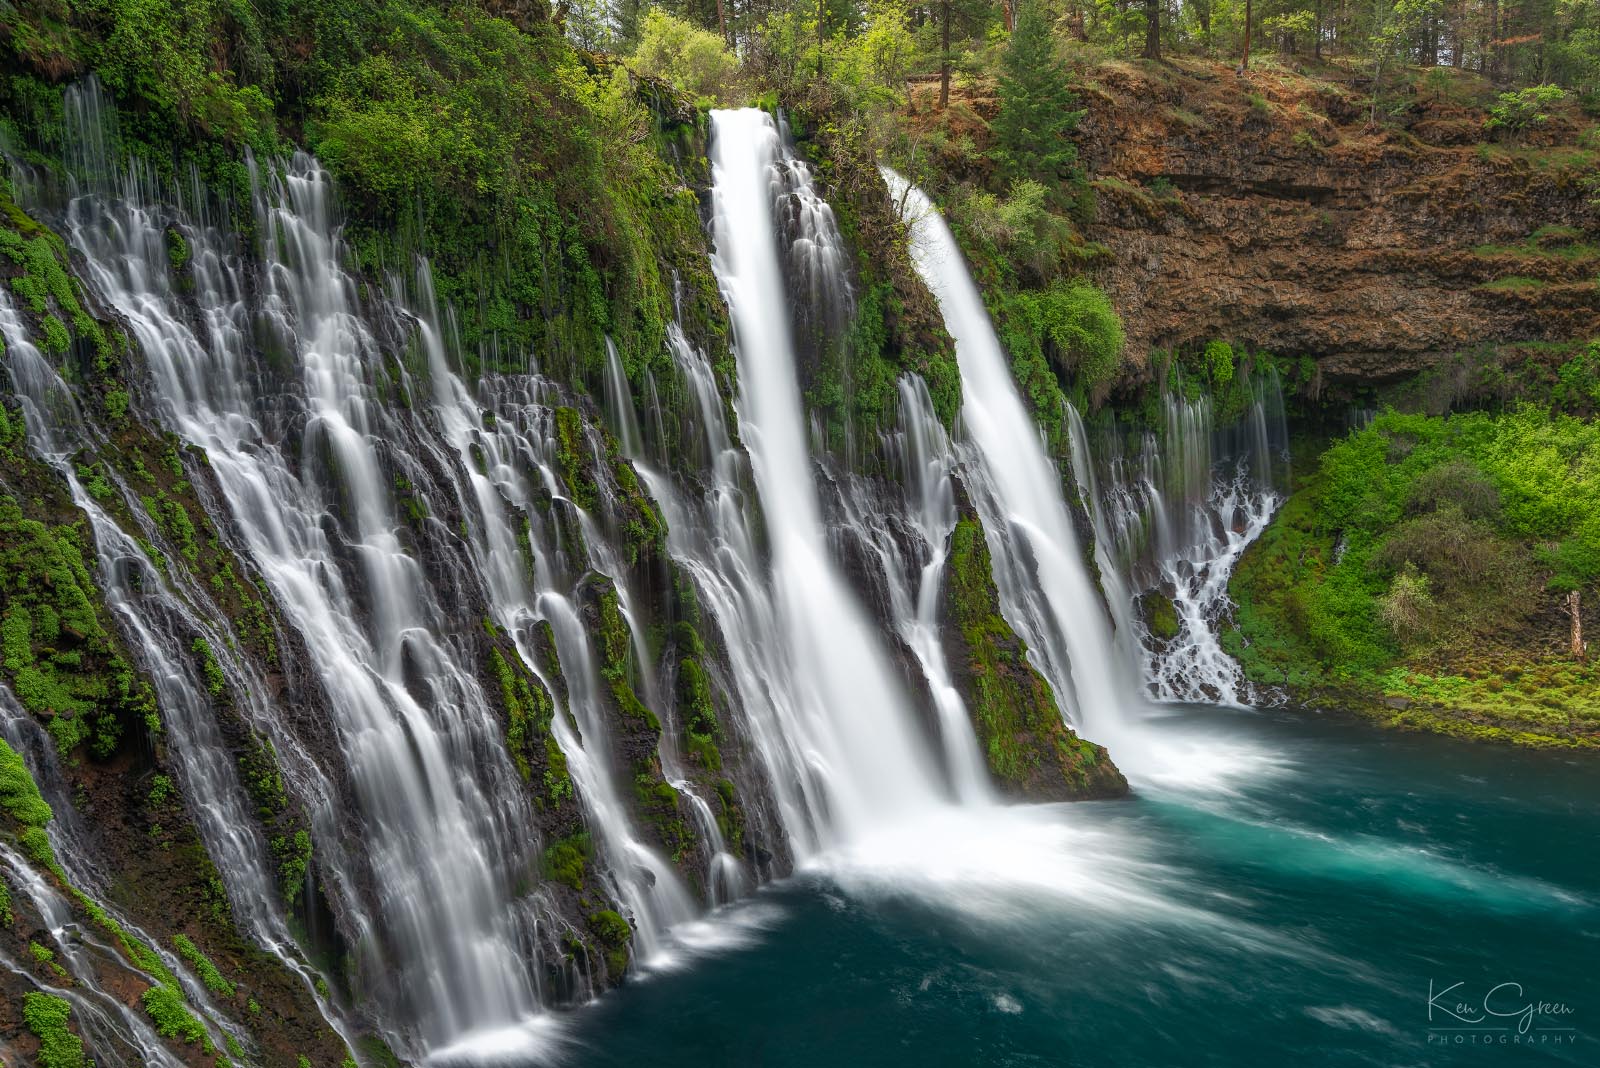 The spectacular and powerful Burney Falls flows year-round in the Shasta region of Northern California.